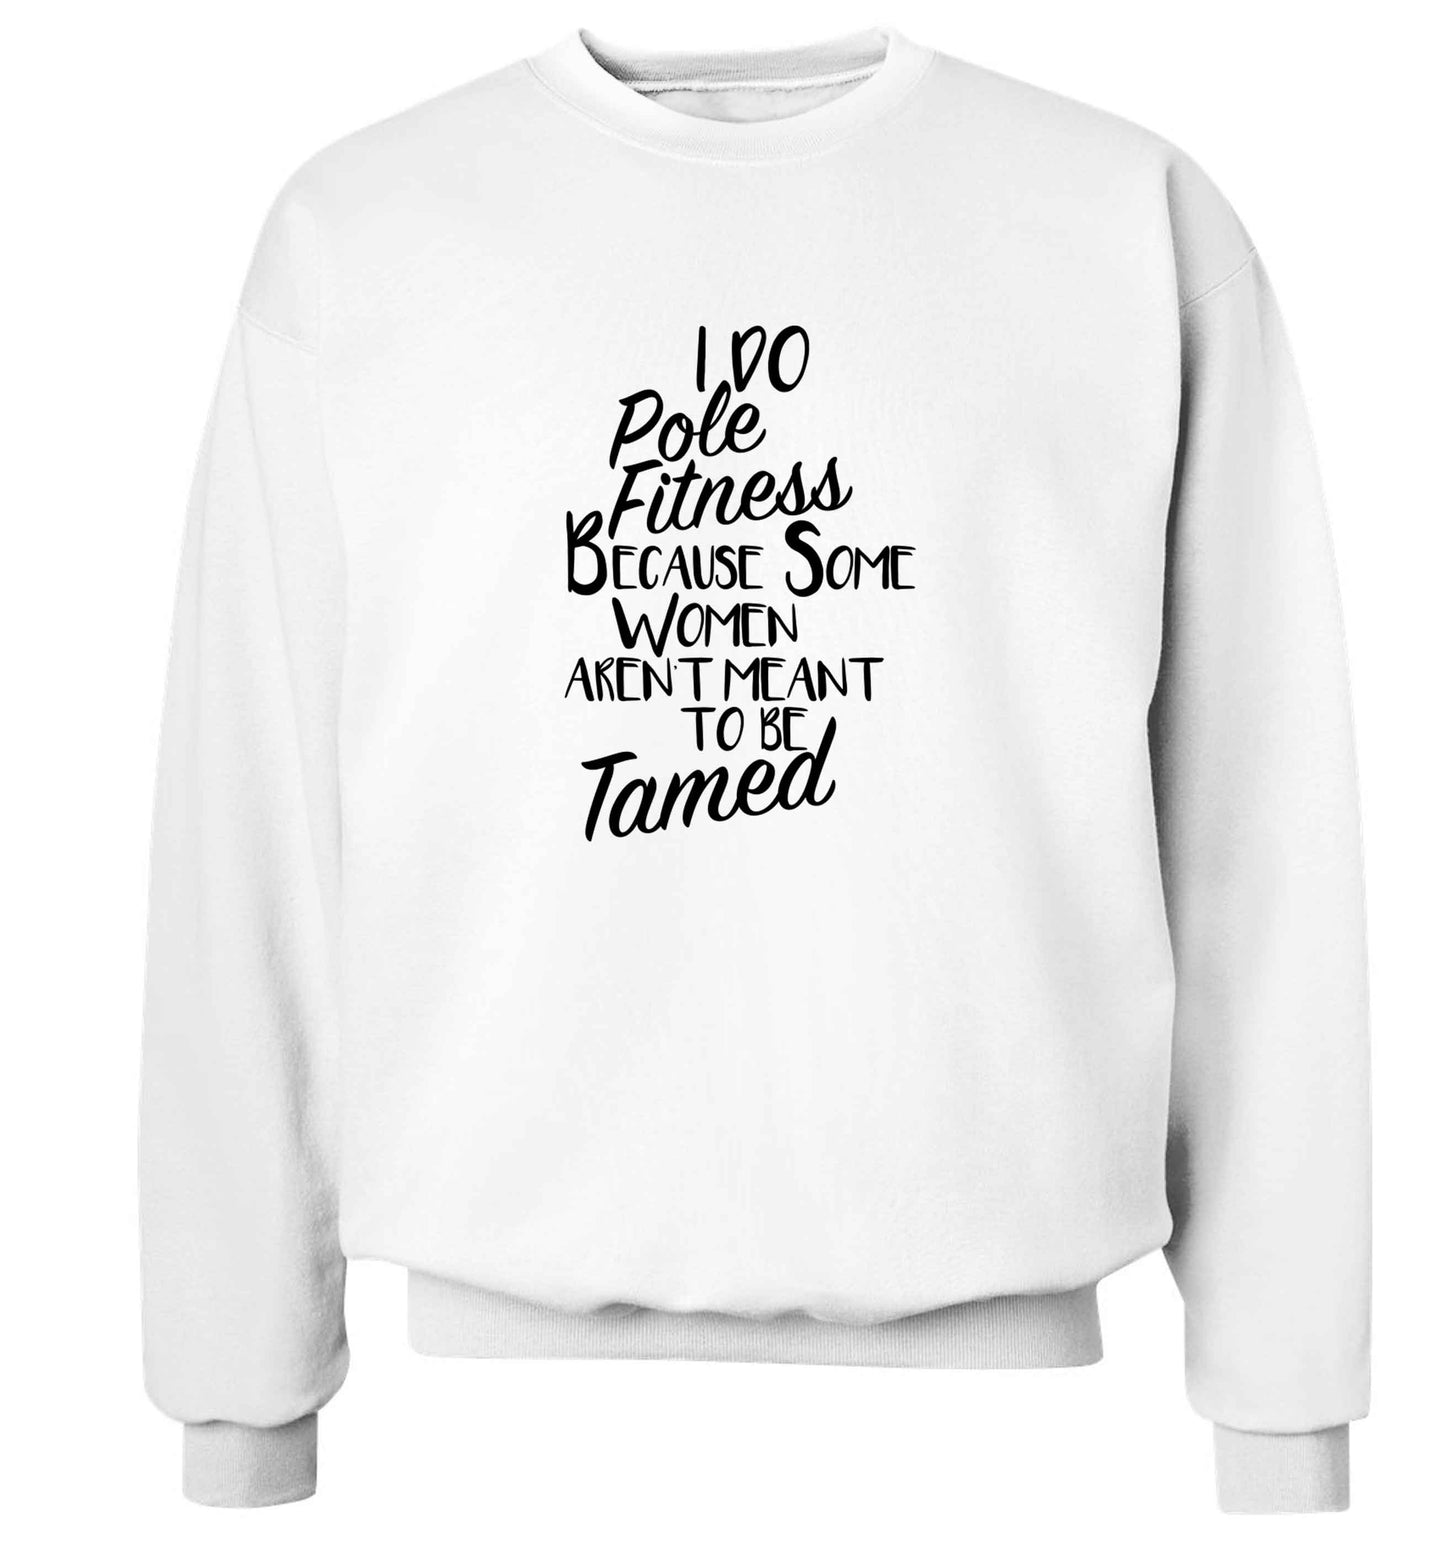 I do pole fitness because some women aren't meant to be tamed adult's unisex white sweater 2XL